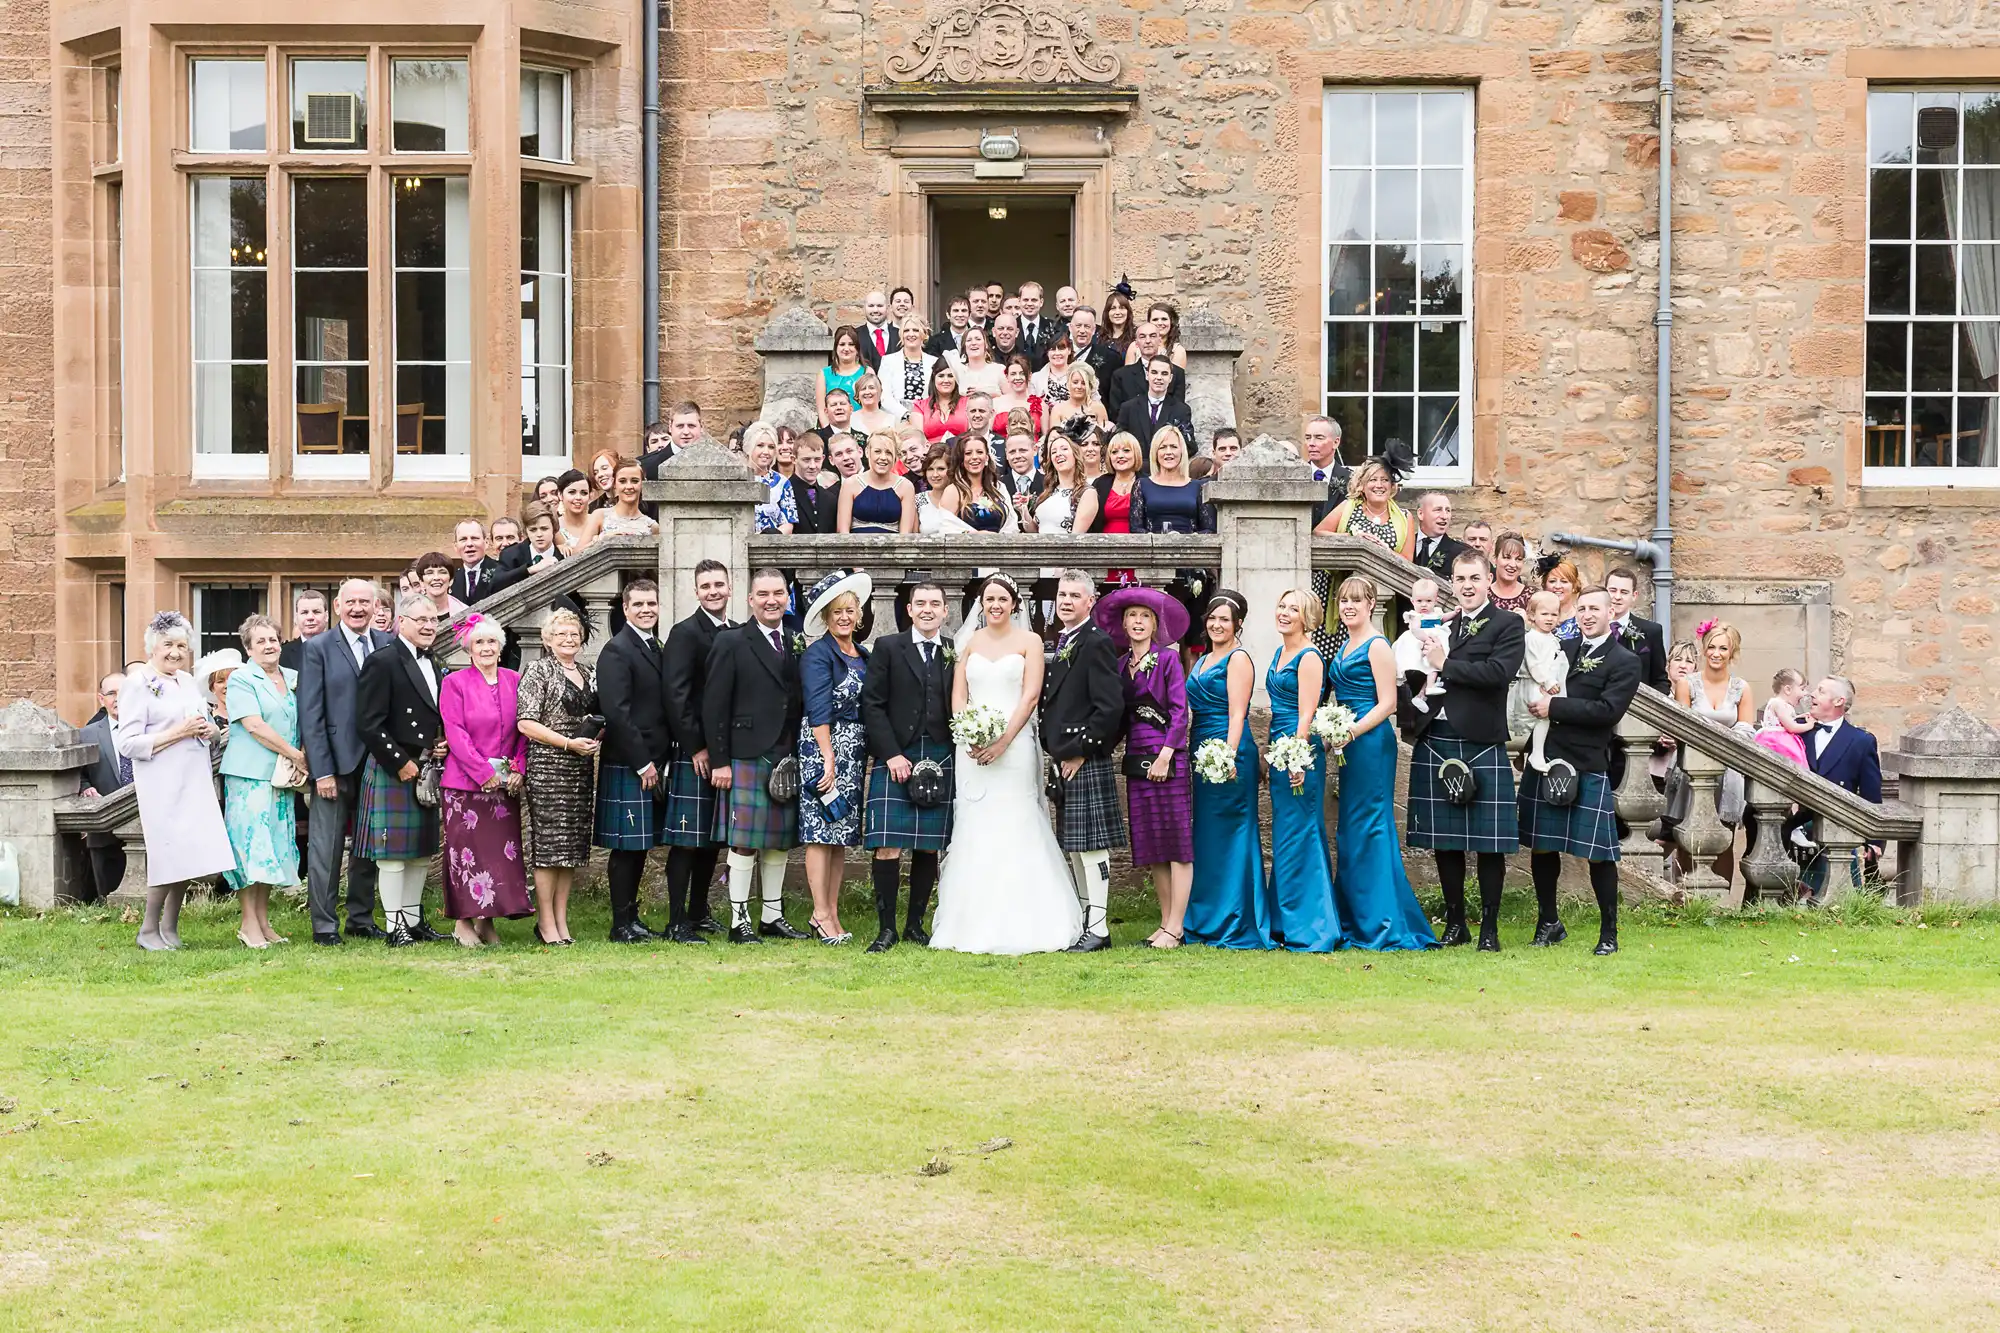 A large group of people in formal and traditional scottish attire posing for a photo at a wedding outside a historic brick building.